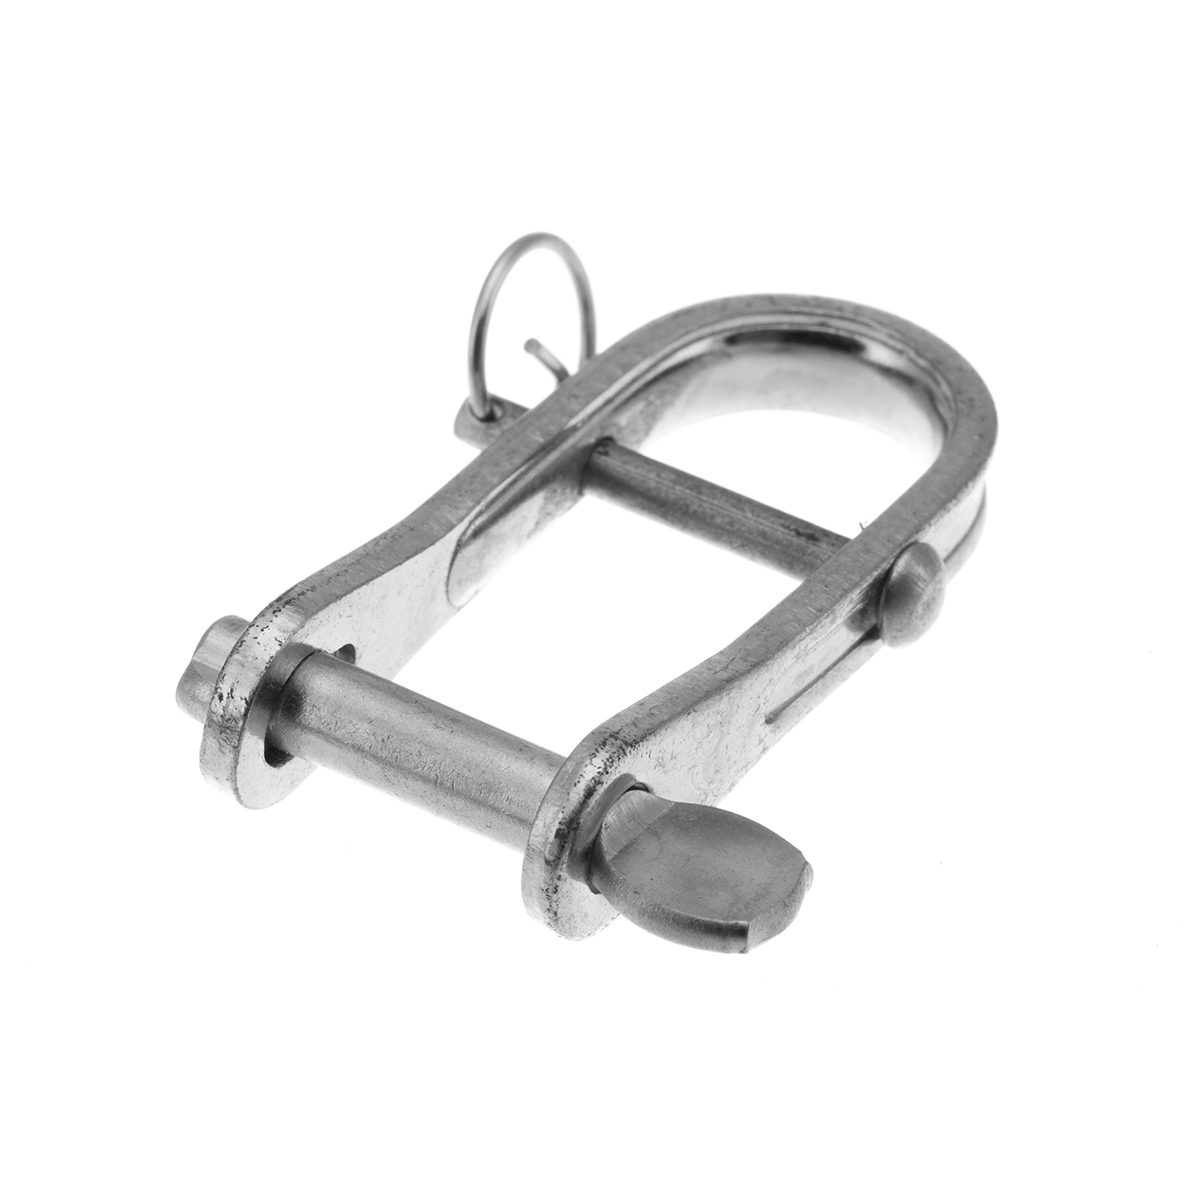 R6160T - Shackle 5P 13W 36L Halyd (Pk Size: 25)